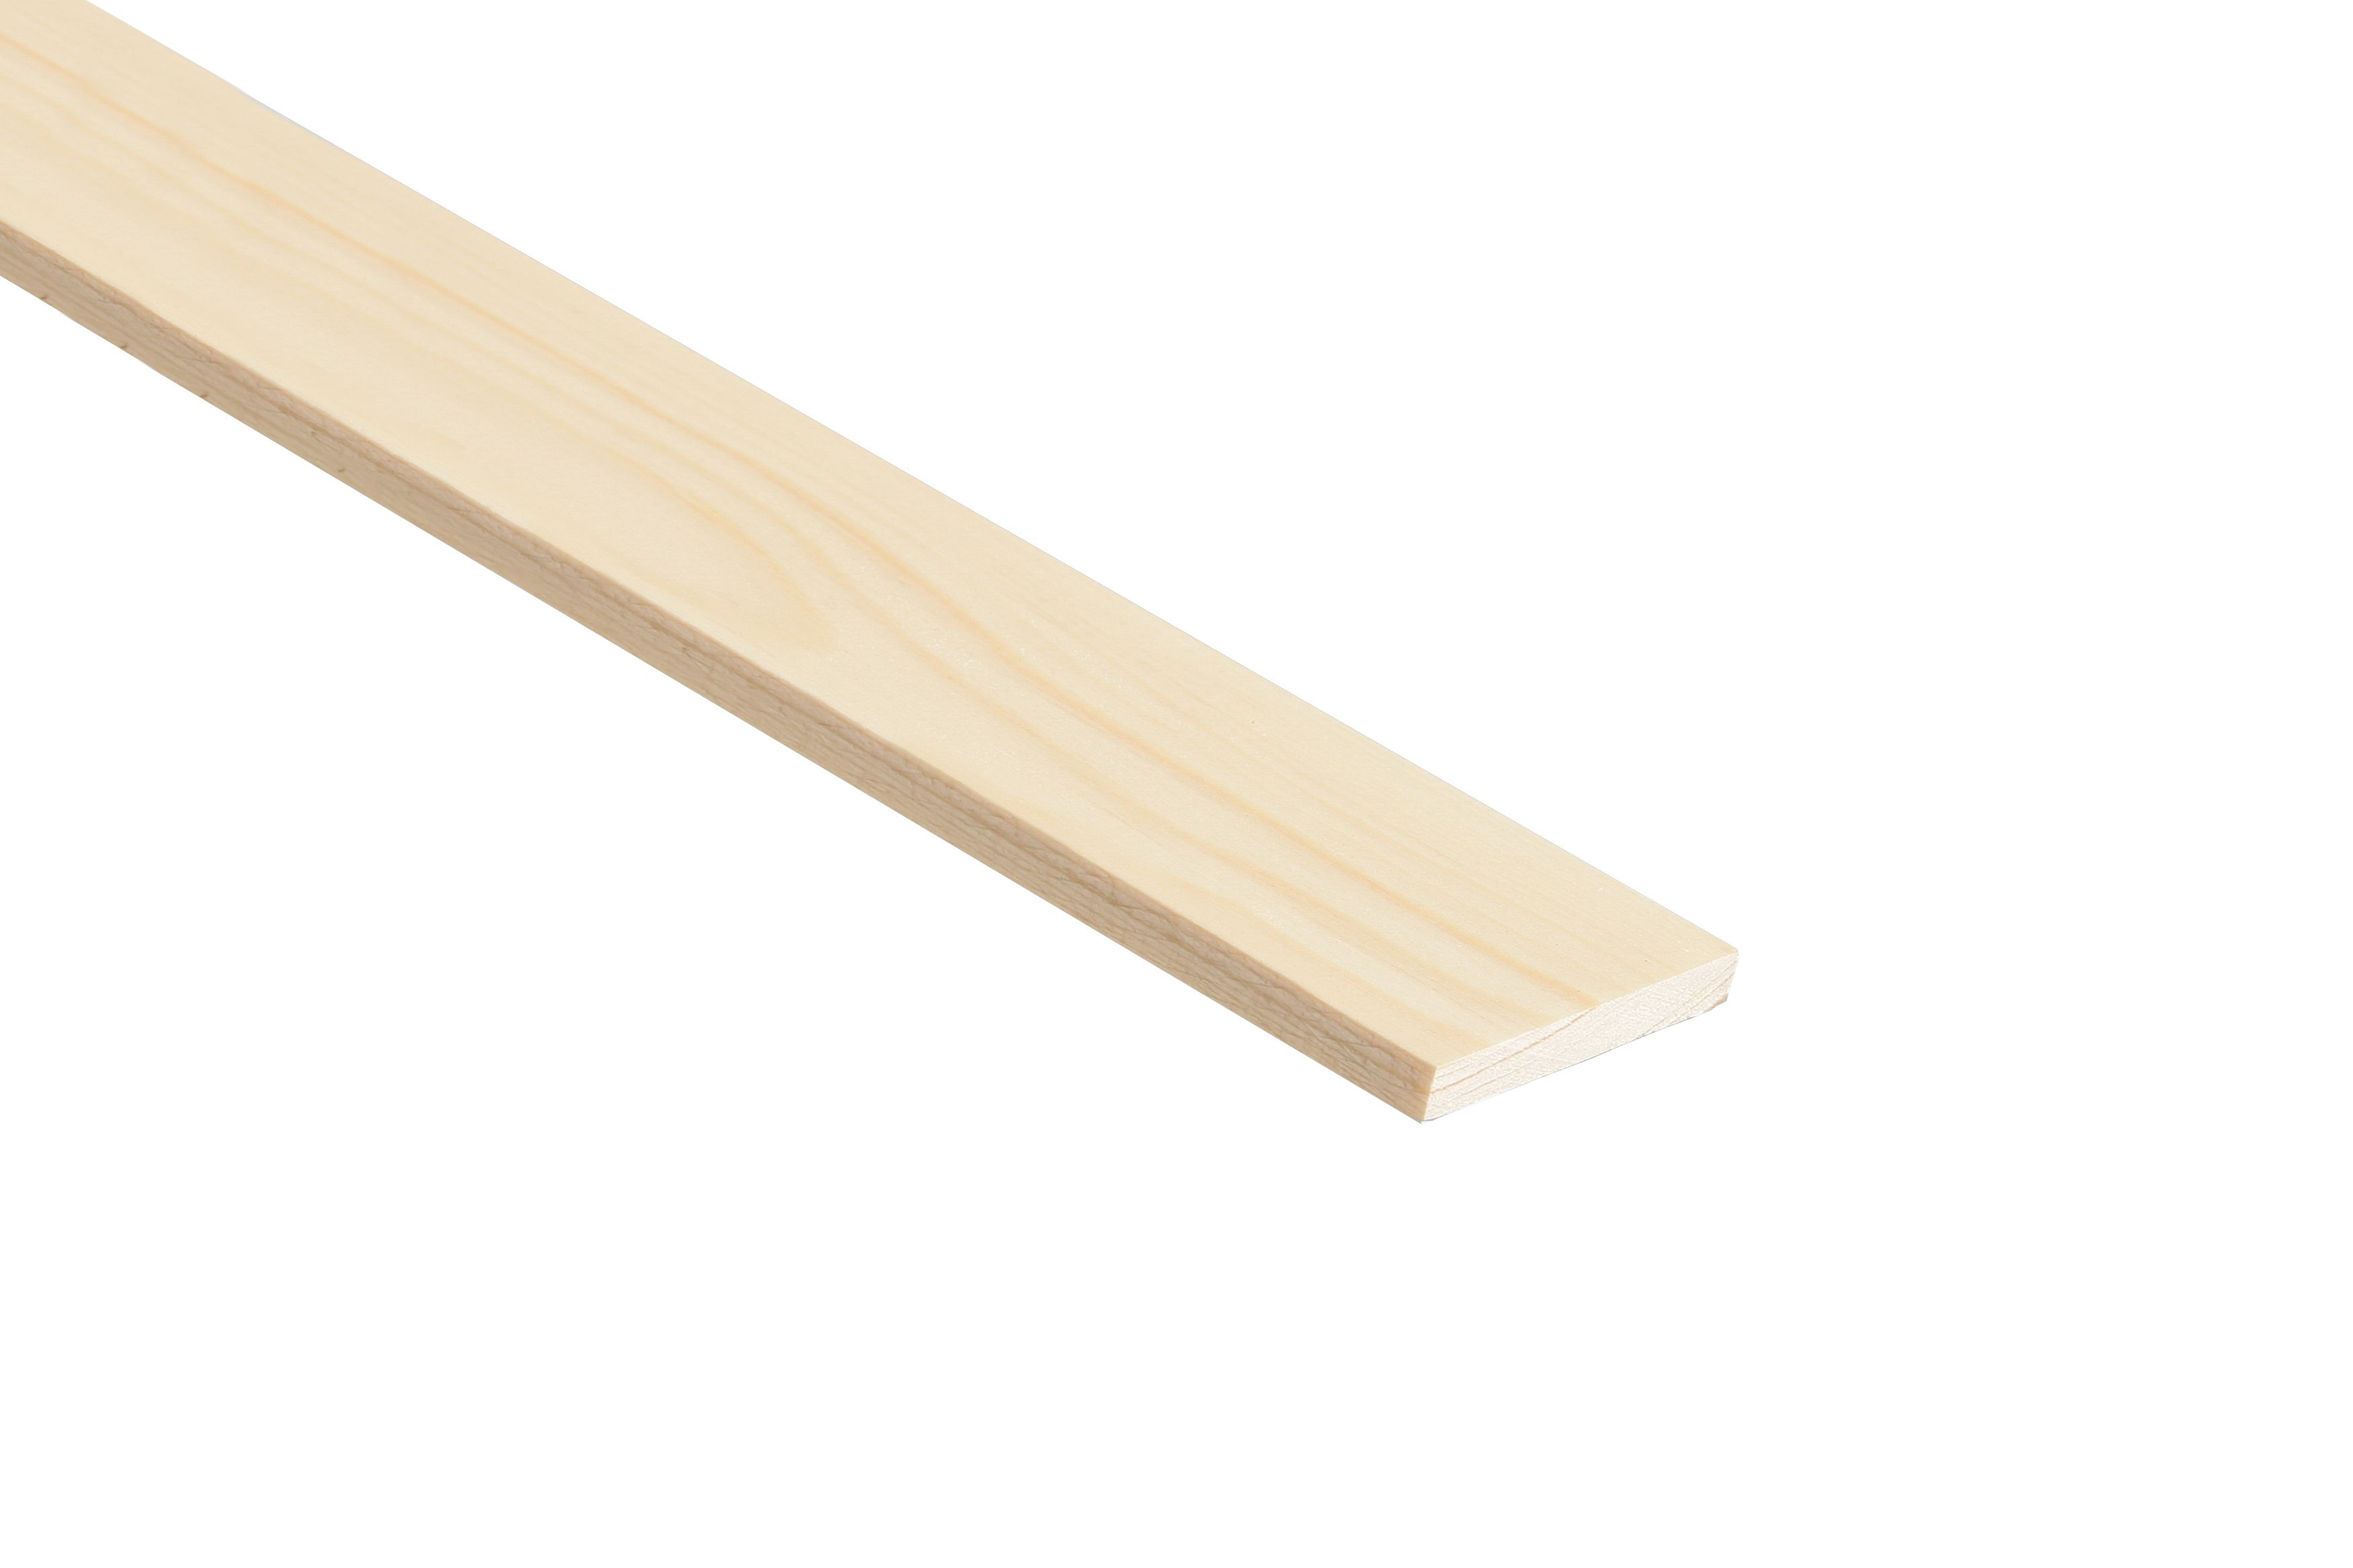 Image of Wickes Pine Stripwood Moulding (PSE) - 6 x 44 x 2400mm